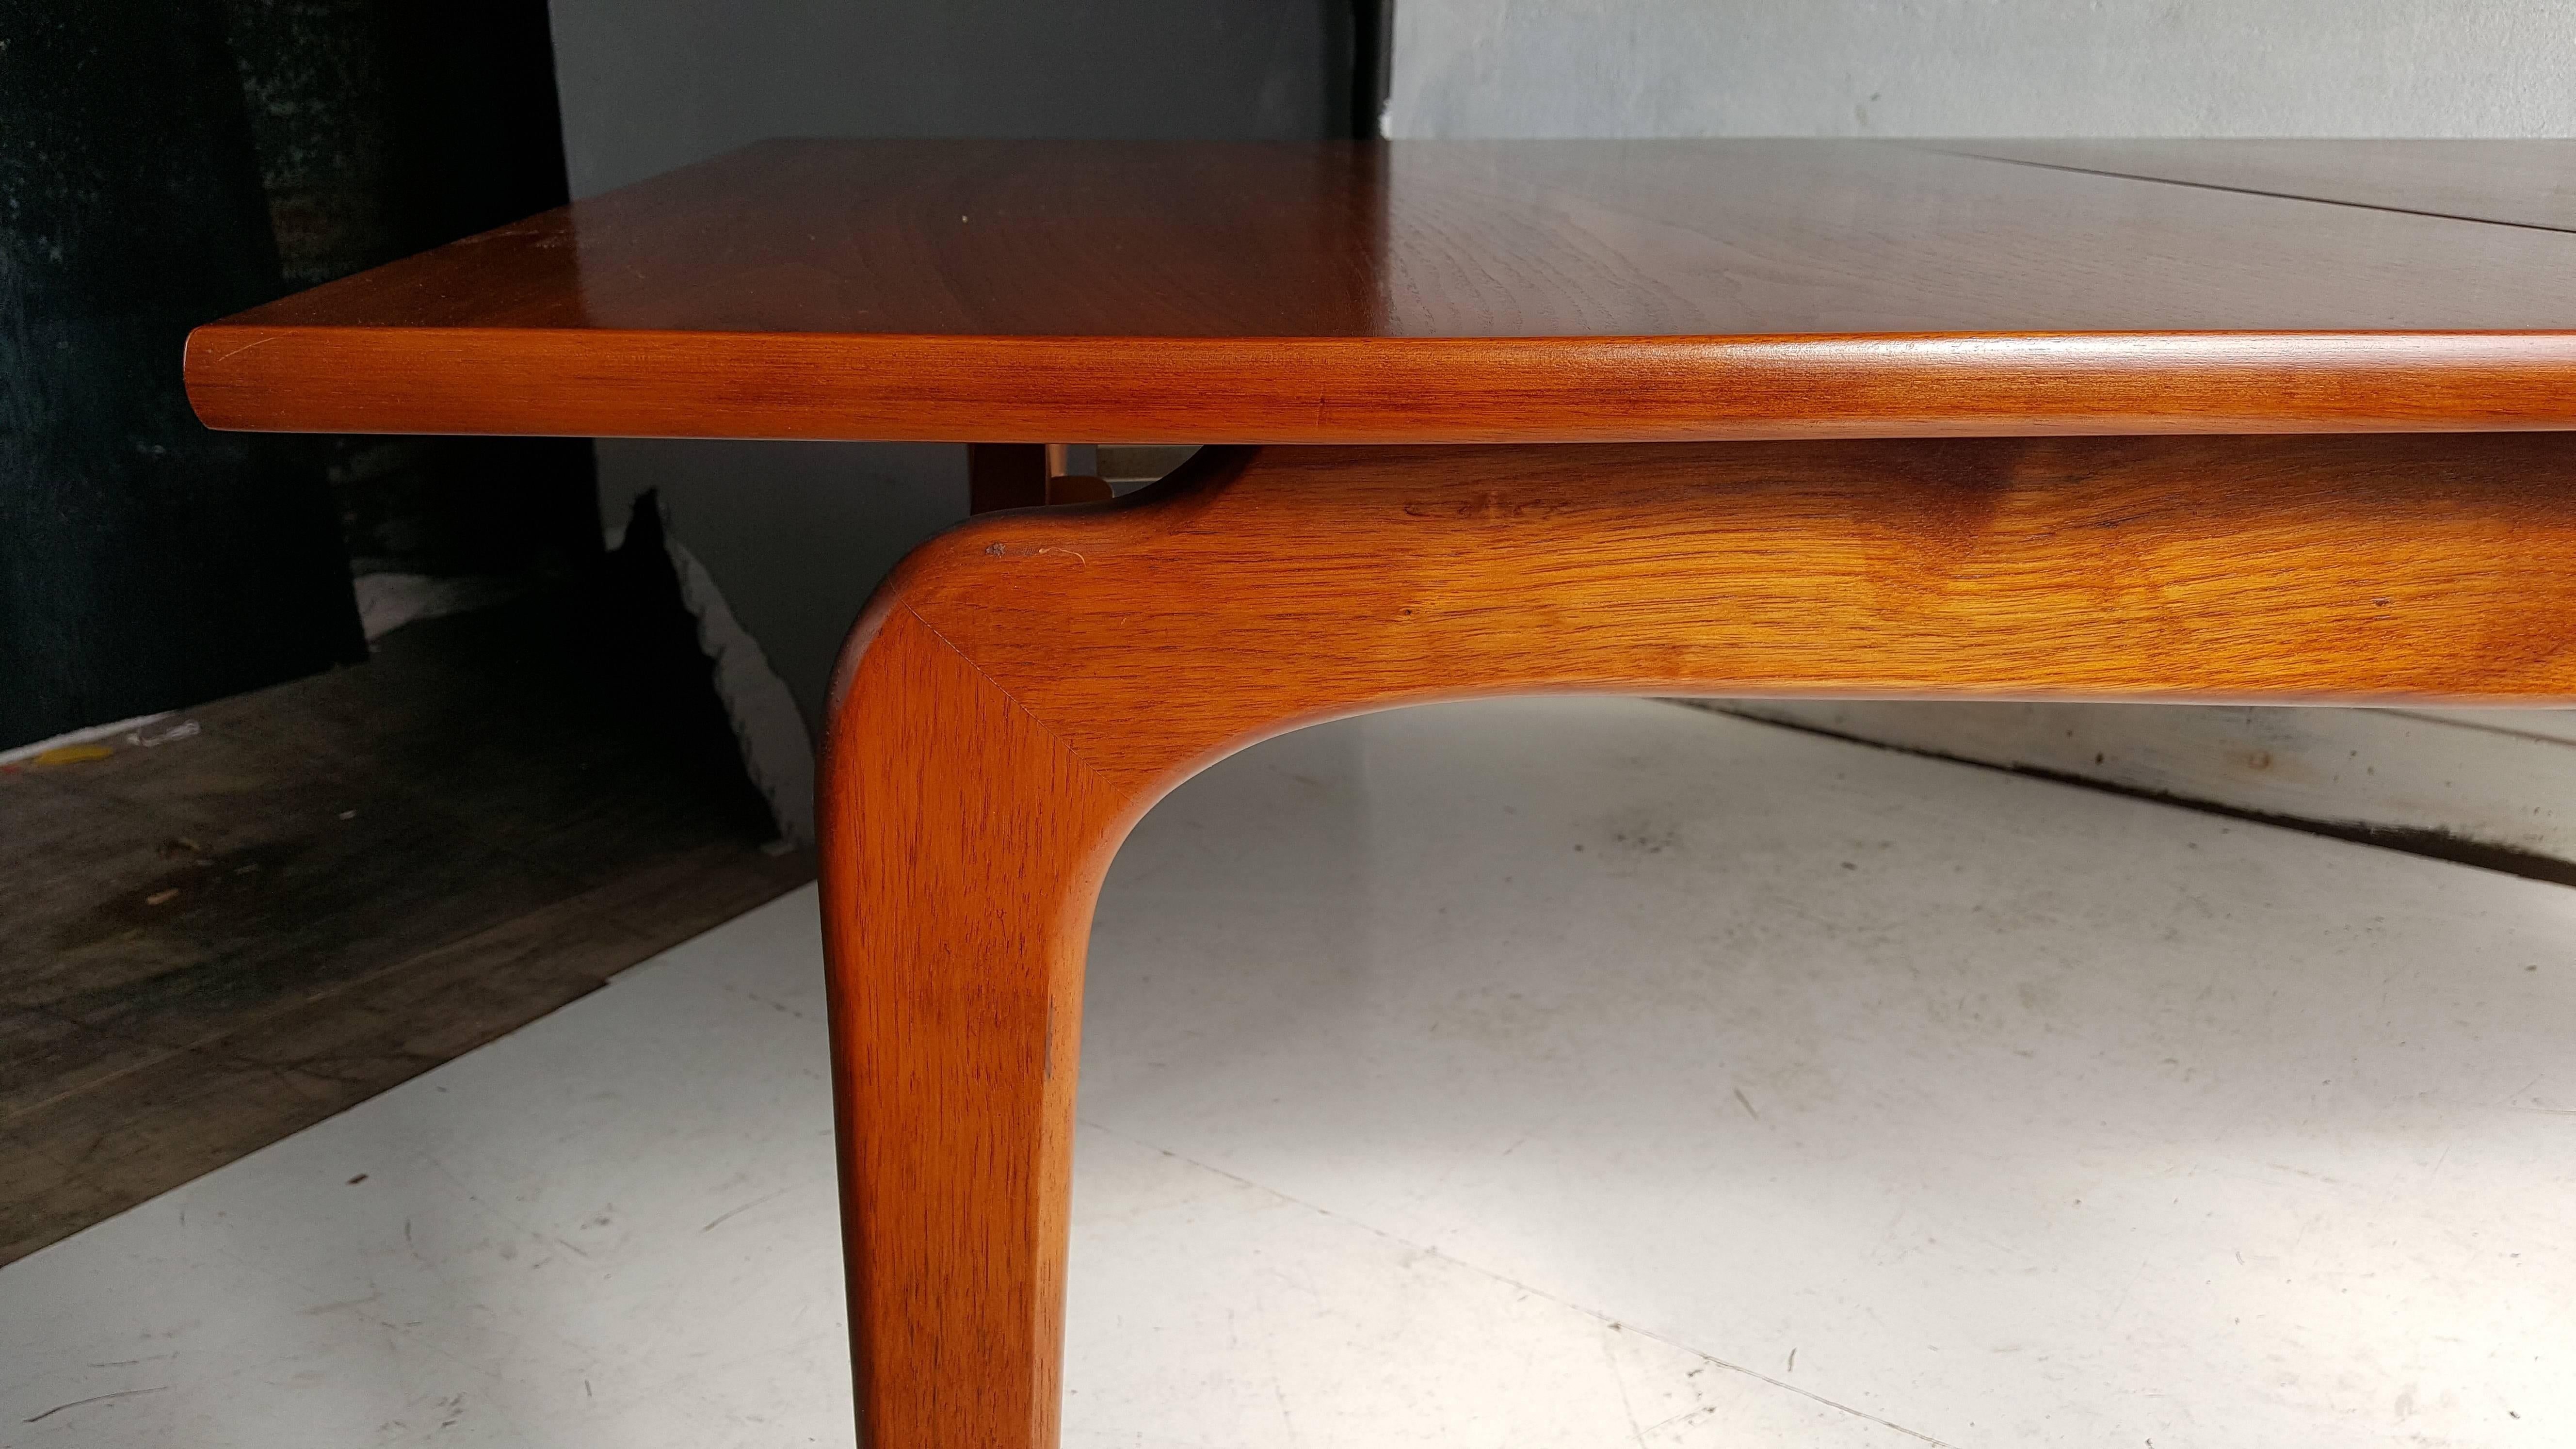 Solid walnut Modernist dining table manufactured by Lane Furniture Co., wonderful Danish design from the 